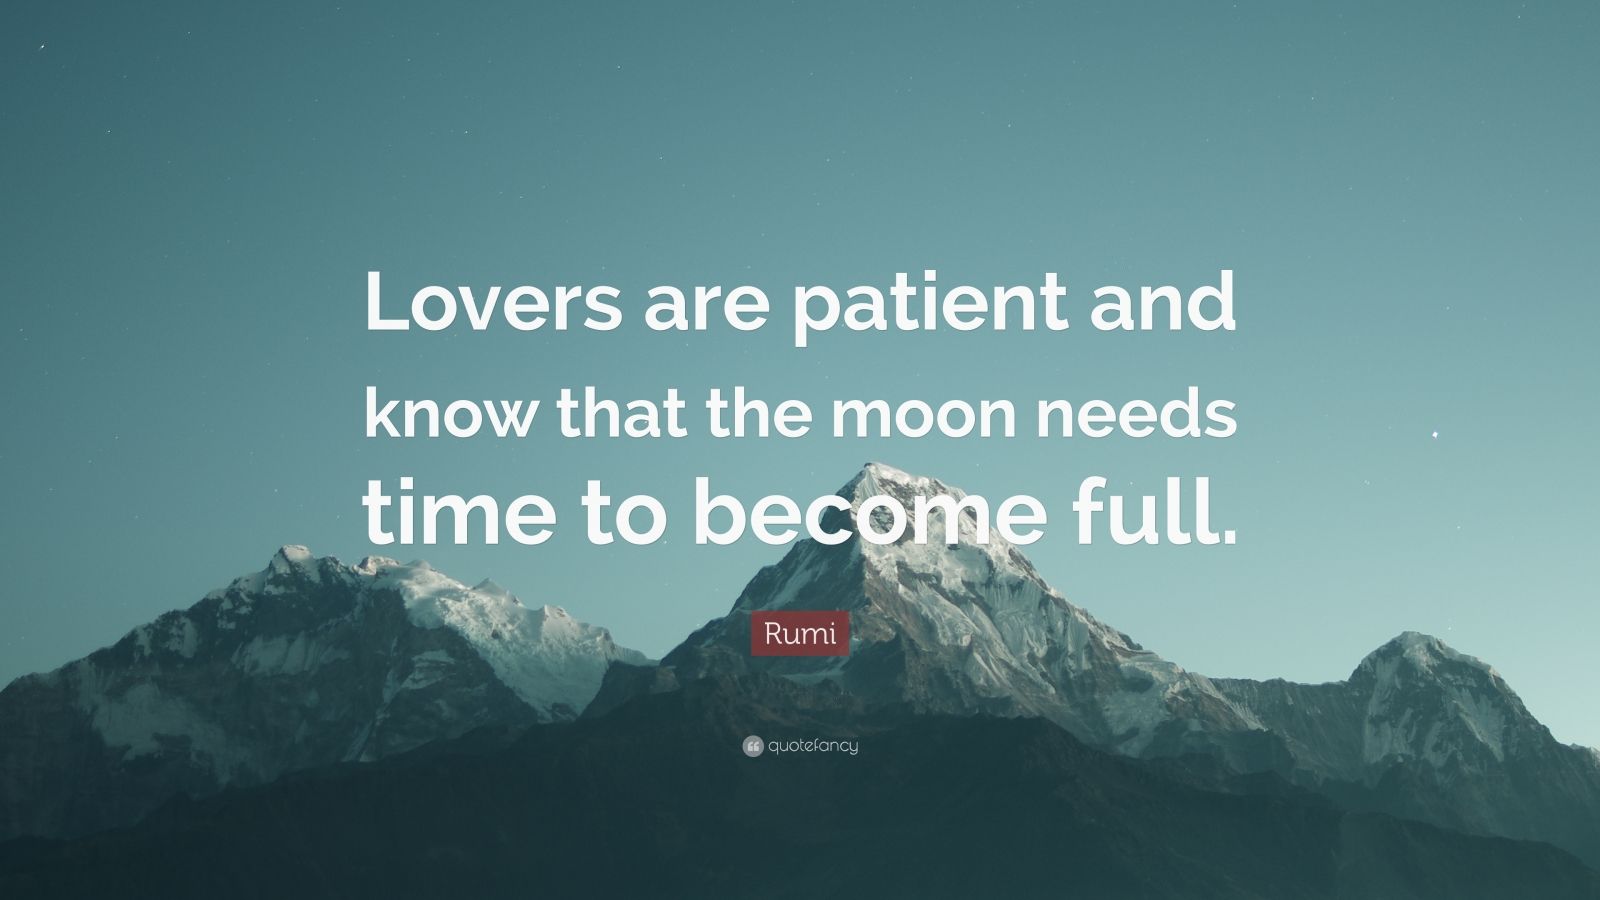 Rumi Quote: "Lovers are patient and know that the moon needs time to become full." (10 ...